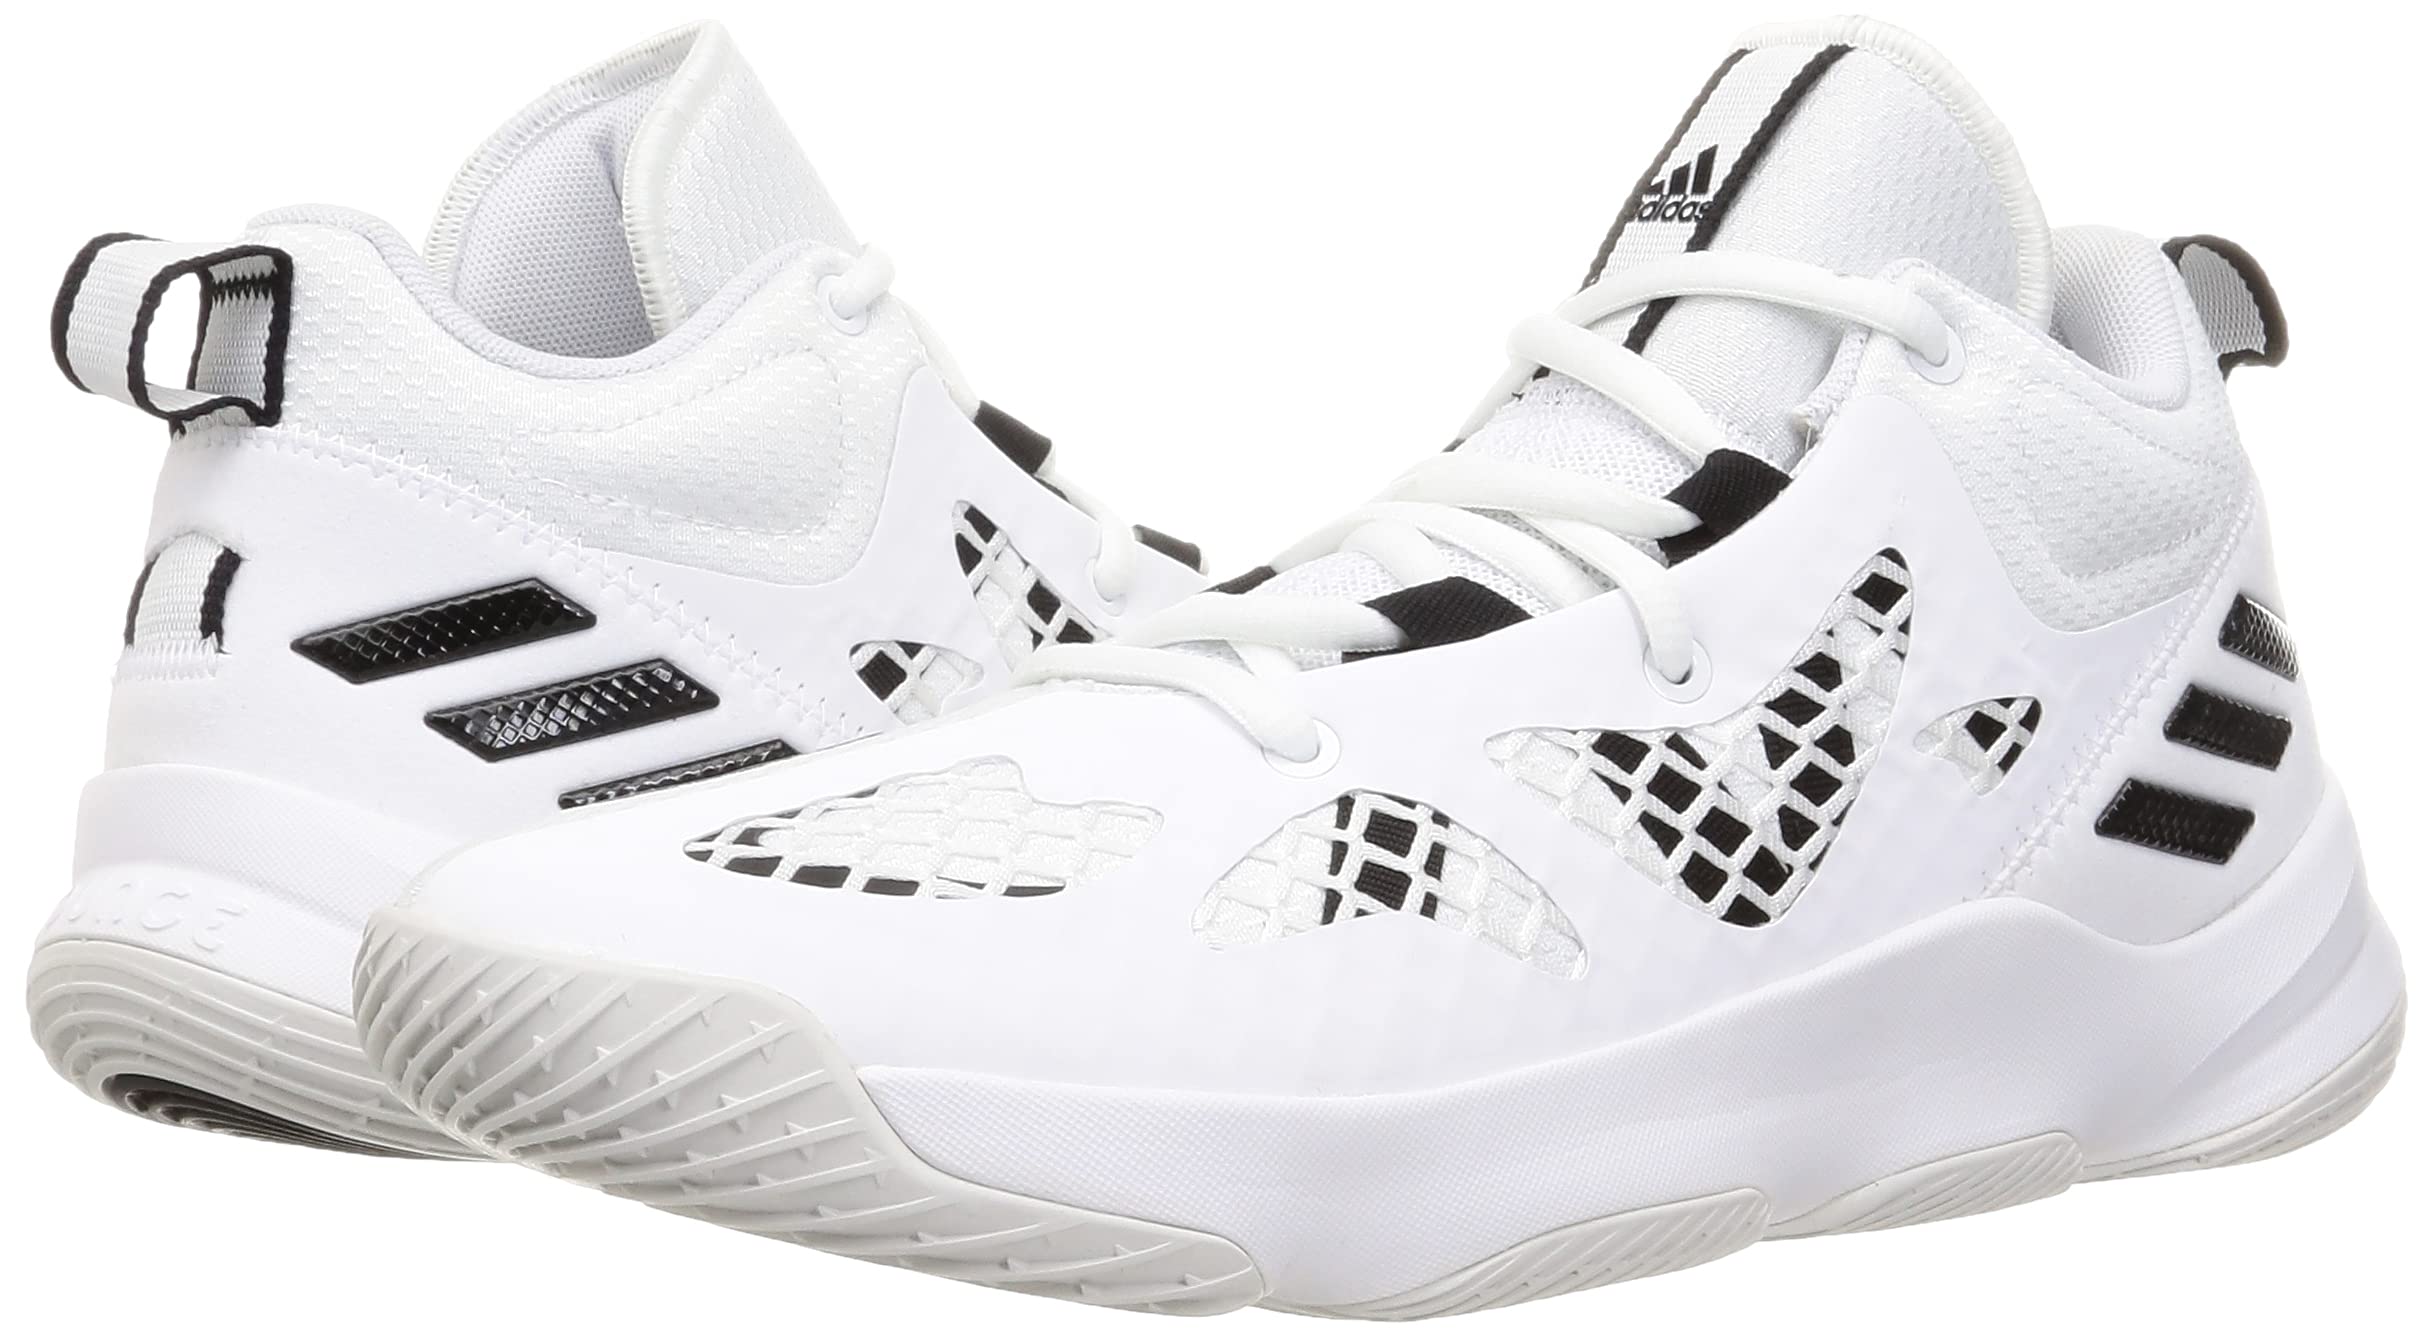 Buy Adidas Pro Next 2019 White Basketball Shoes for Men at Best Price @  Tata CLiQ